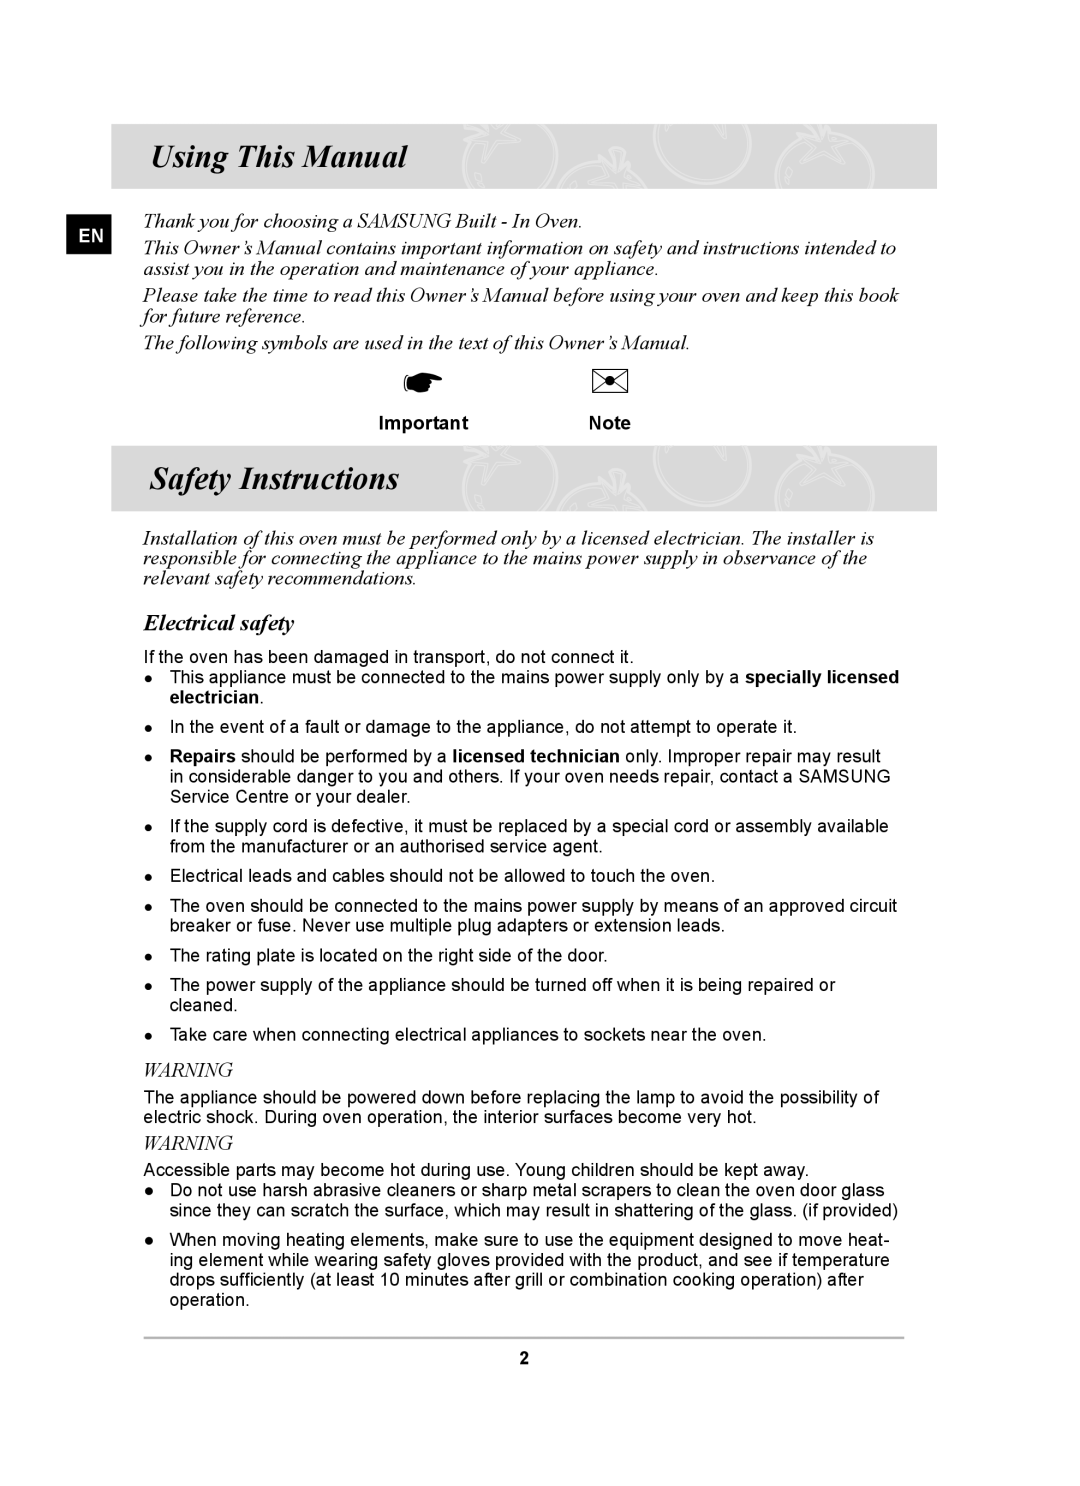 Samsung BT62CDBFST, BT62CDBST owner manual Using This Manual, Safety Instructions, Electrical safety 